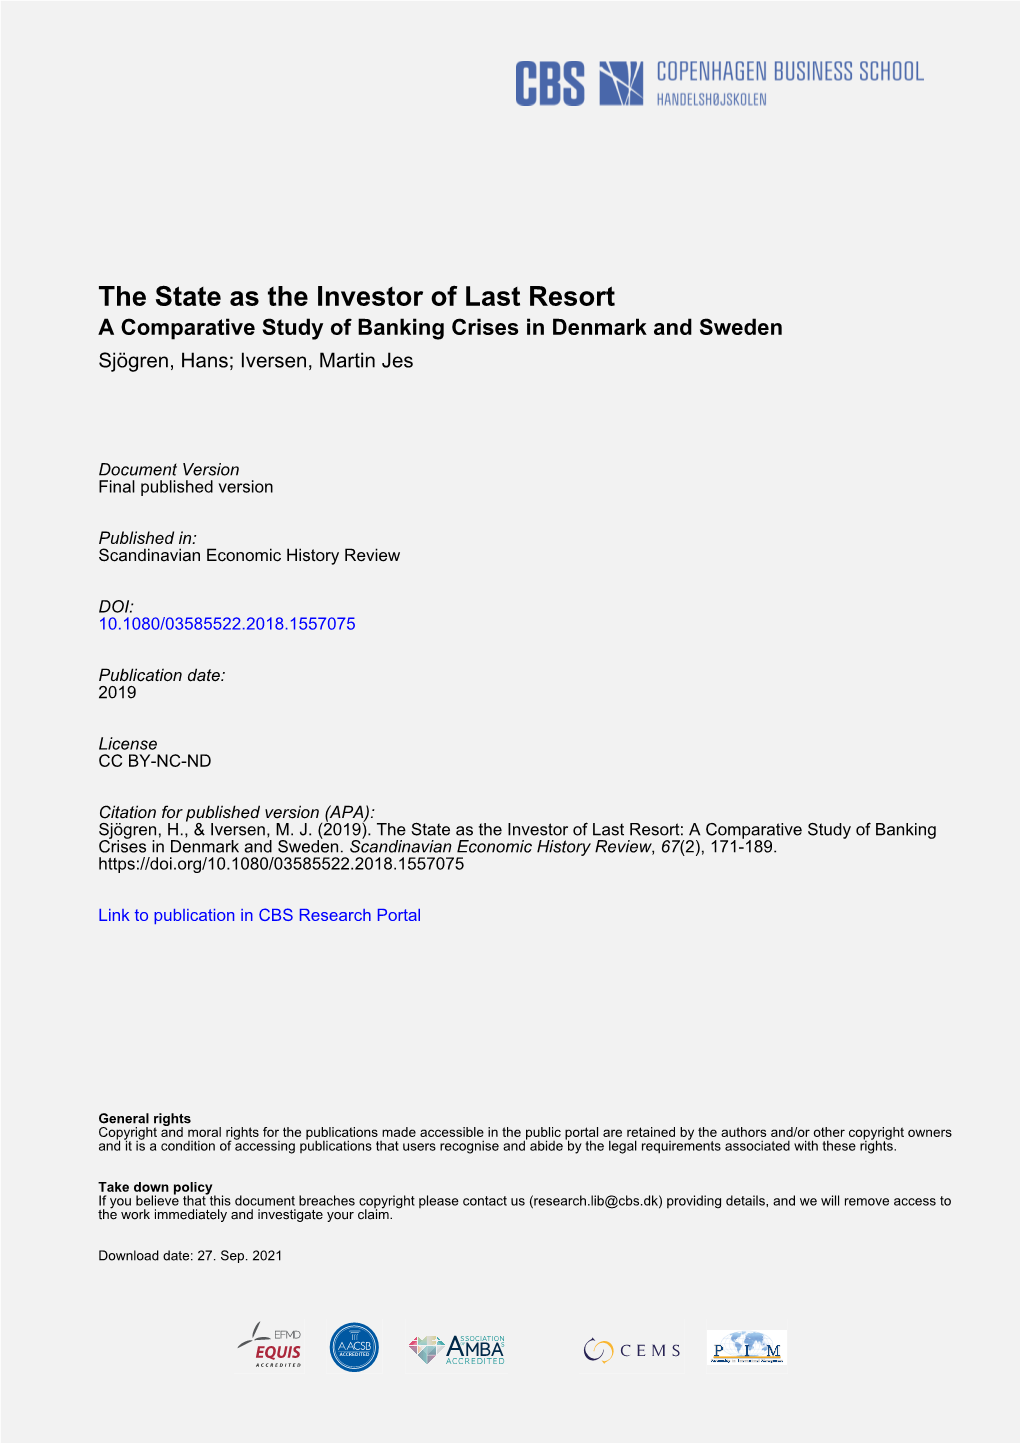 The State As the Investor of Last Resort: a Comparative Study of Banking Crises in Denmark and Sweden